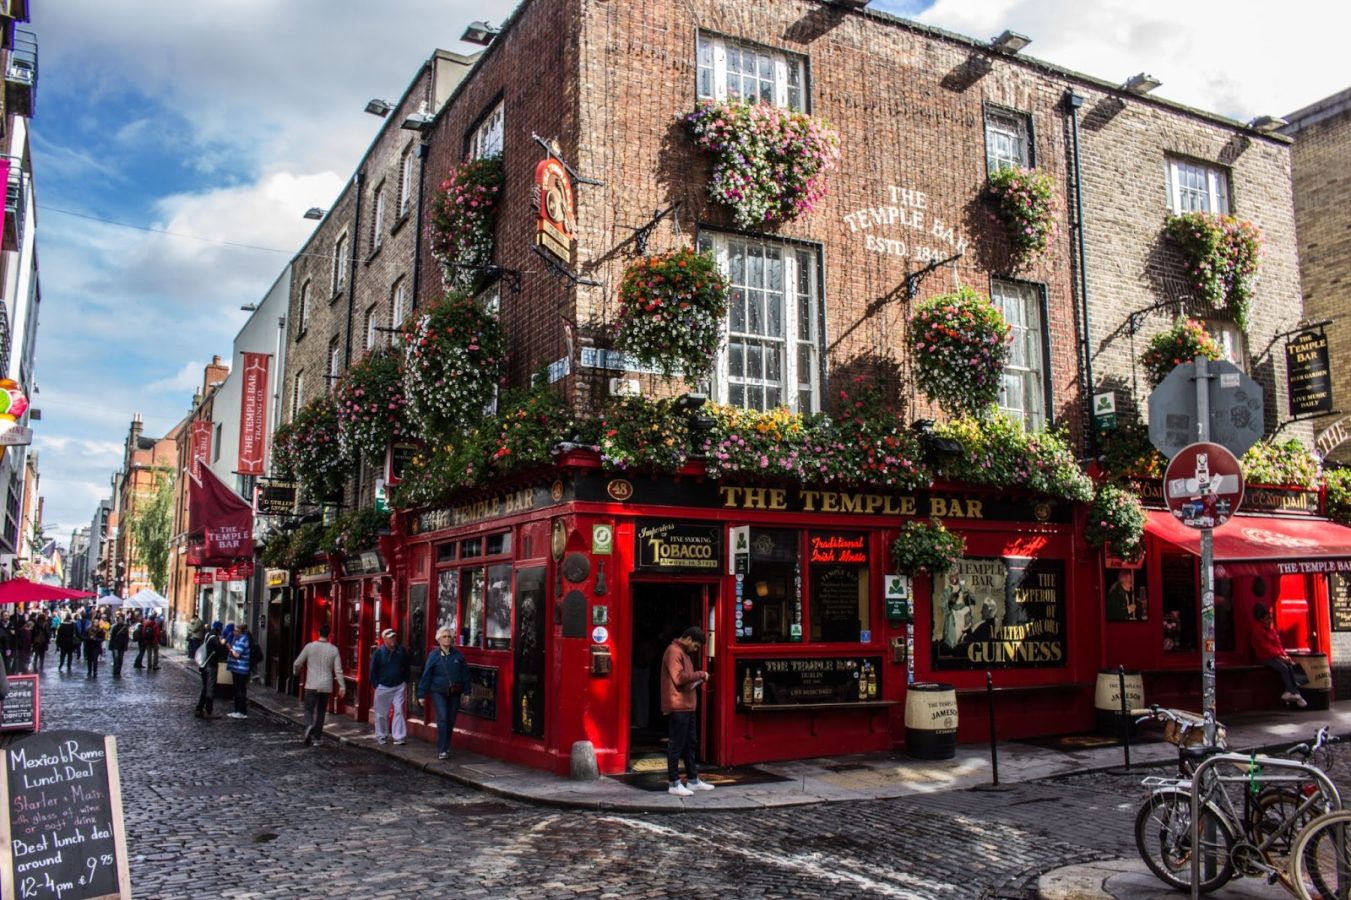 The Temple Bar in a street corner in Dublin, Ireland - the destination to travel to for Nursing majors.